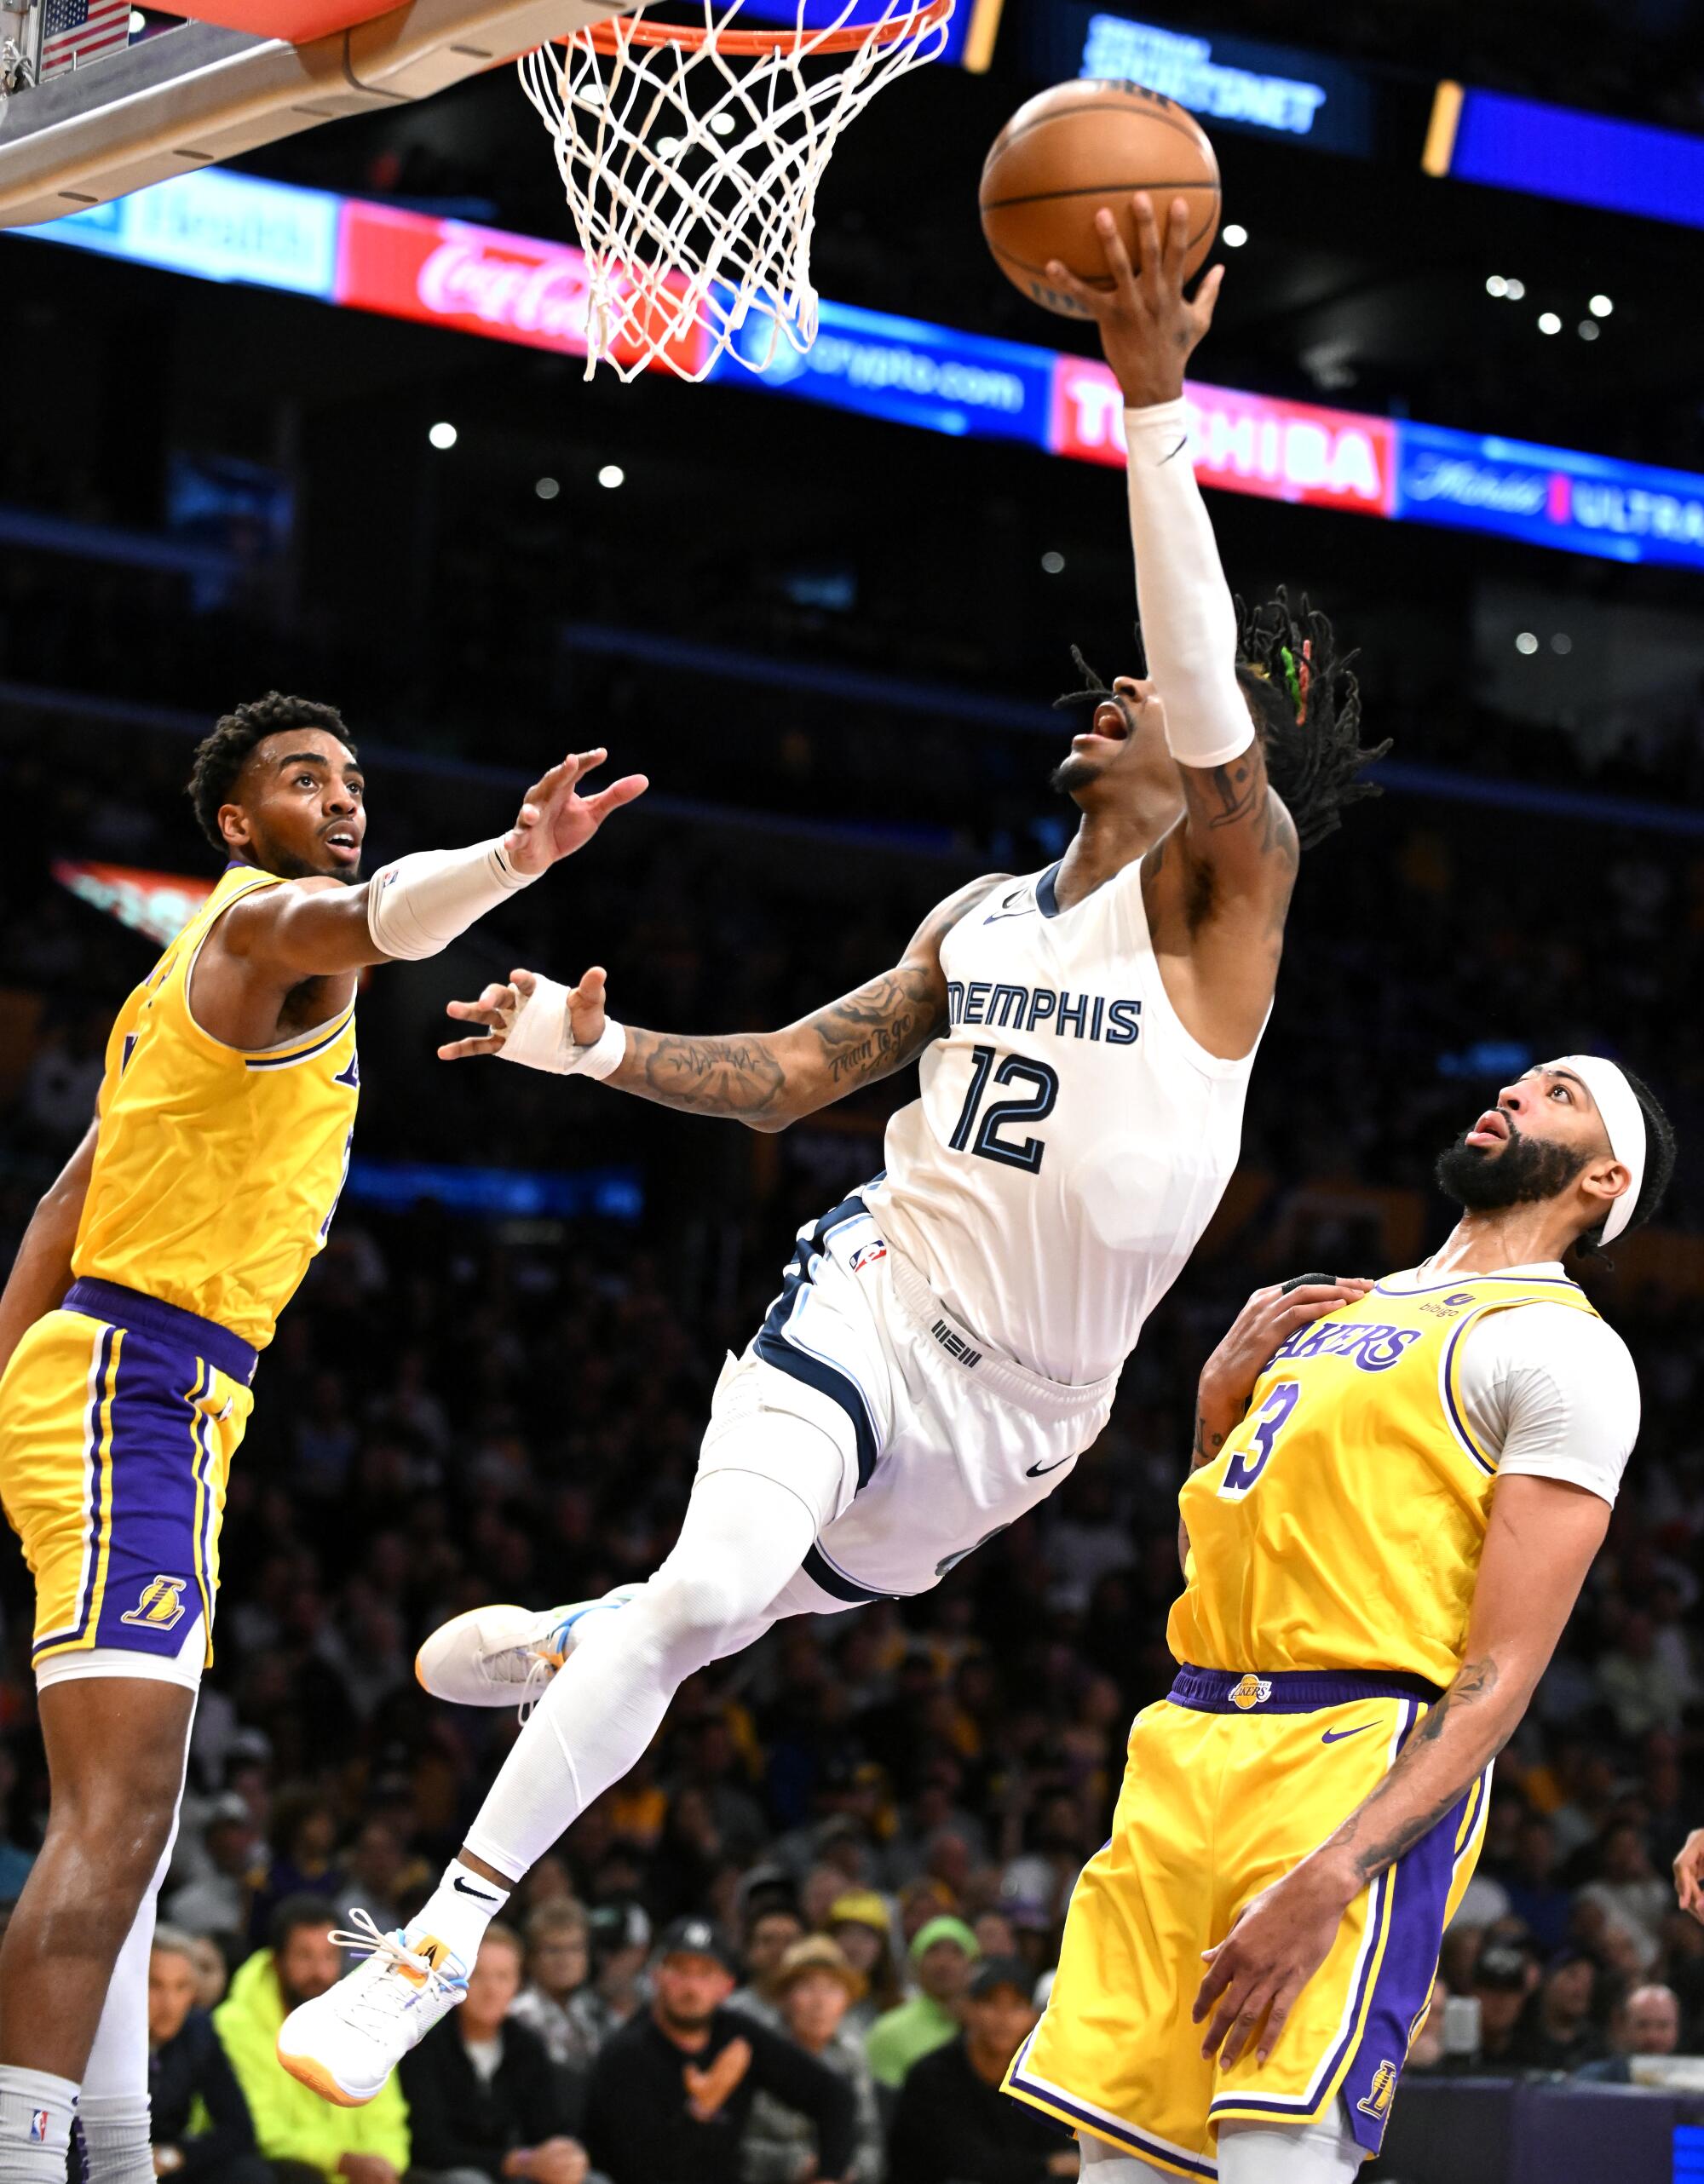 The Grizzlies' Ja Morant drives between Troy Brown Jr., left, and Anthony Davis but misses the basket in the second quarter.